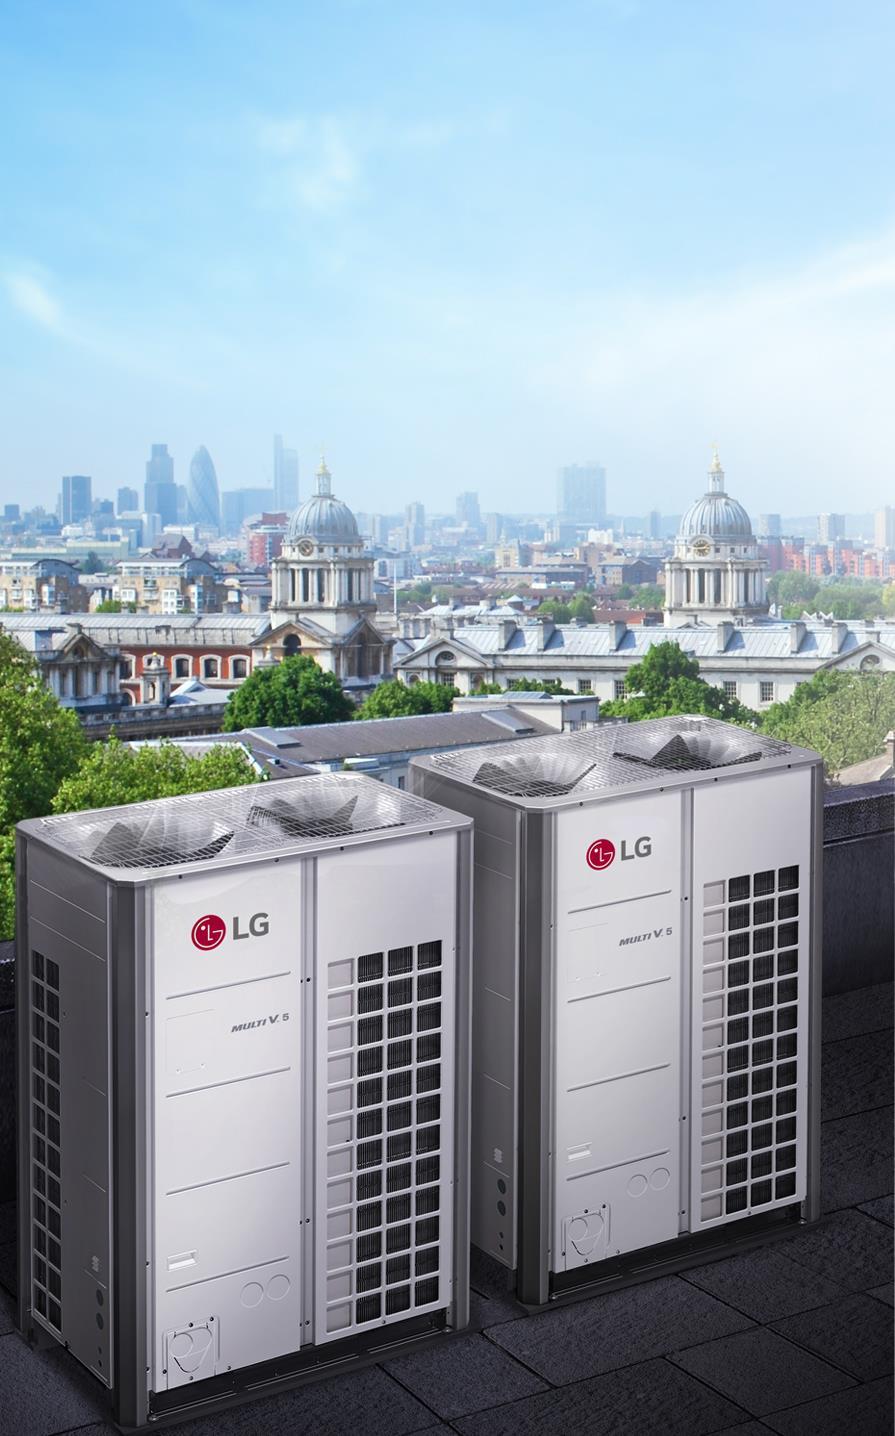 More efficient HVAC systems are required to significantly